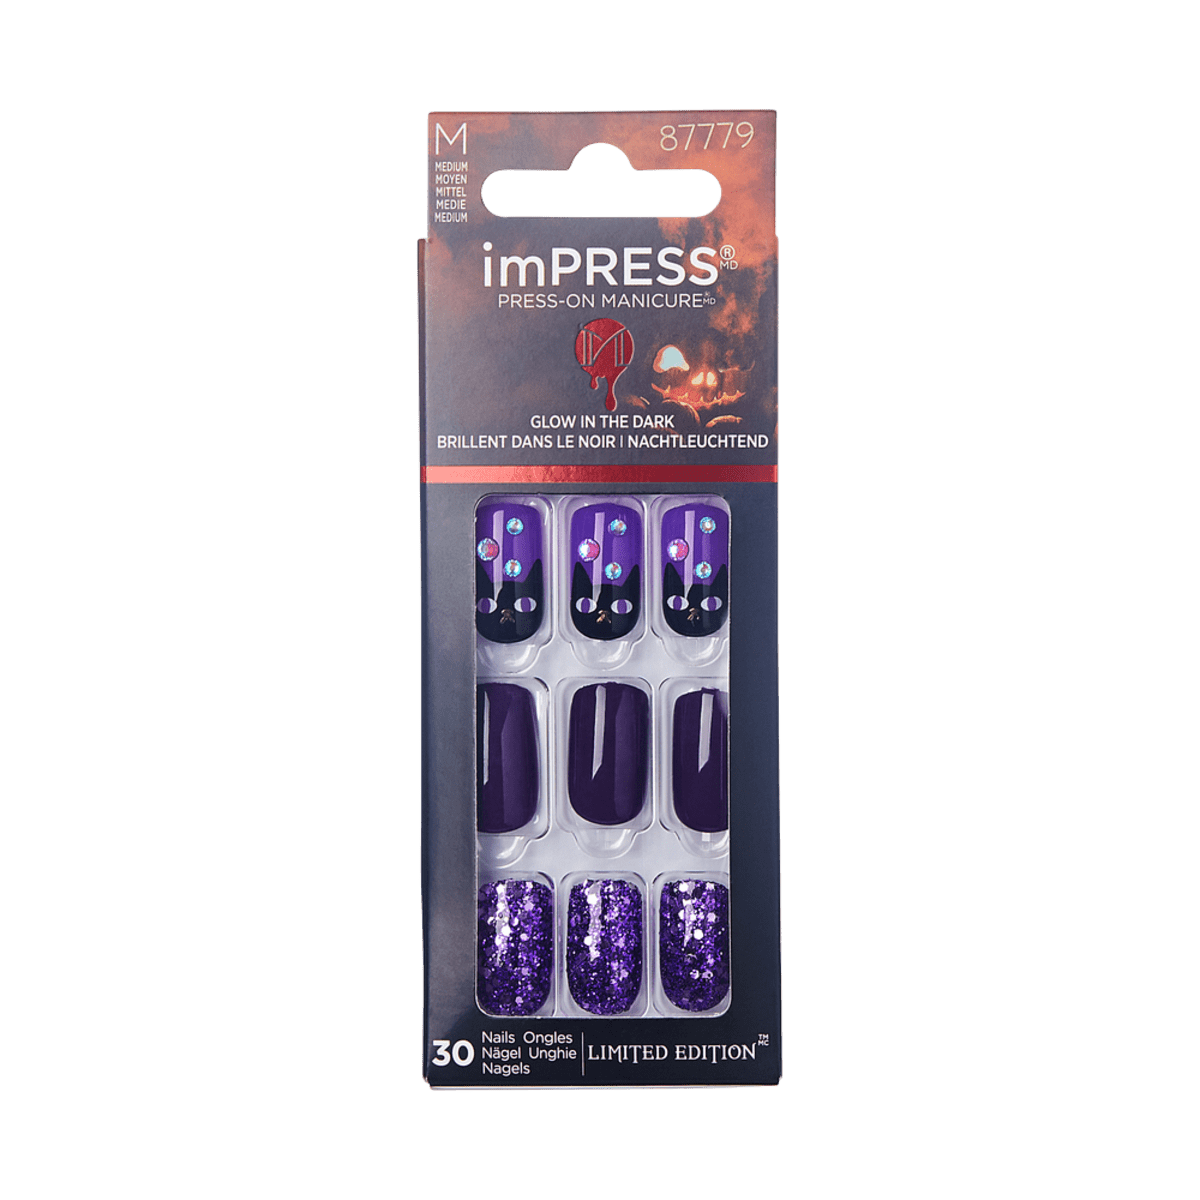 imPRESS Press-On Manicure Halloween Glow in the Dark - Too cute to spook